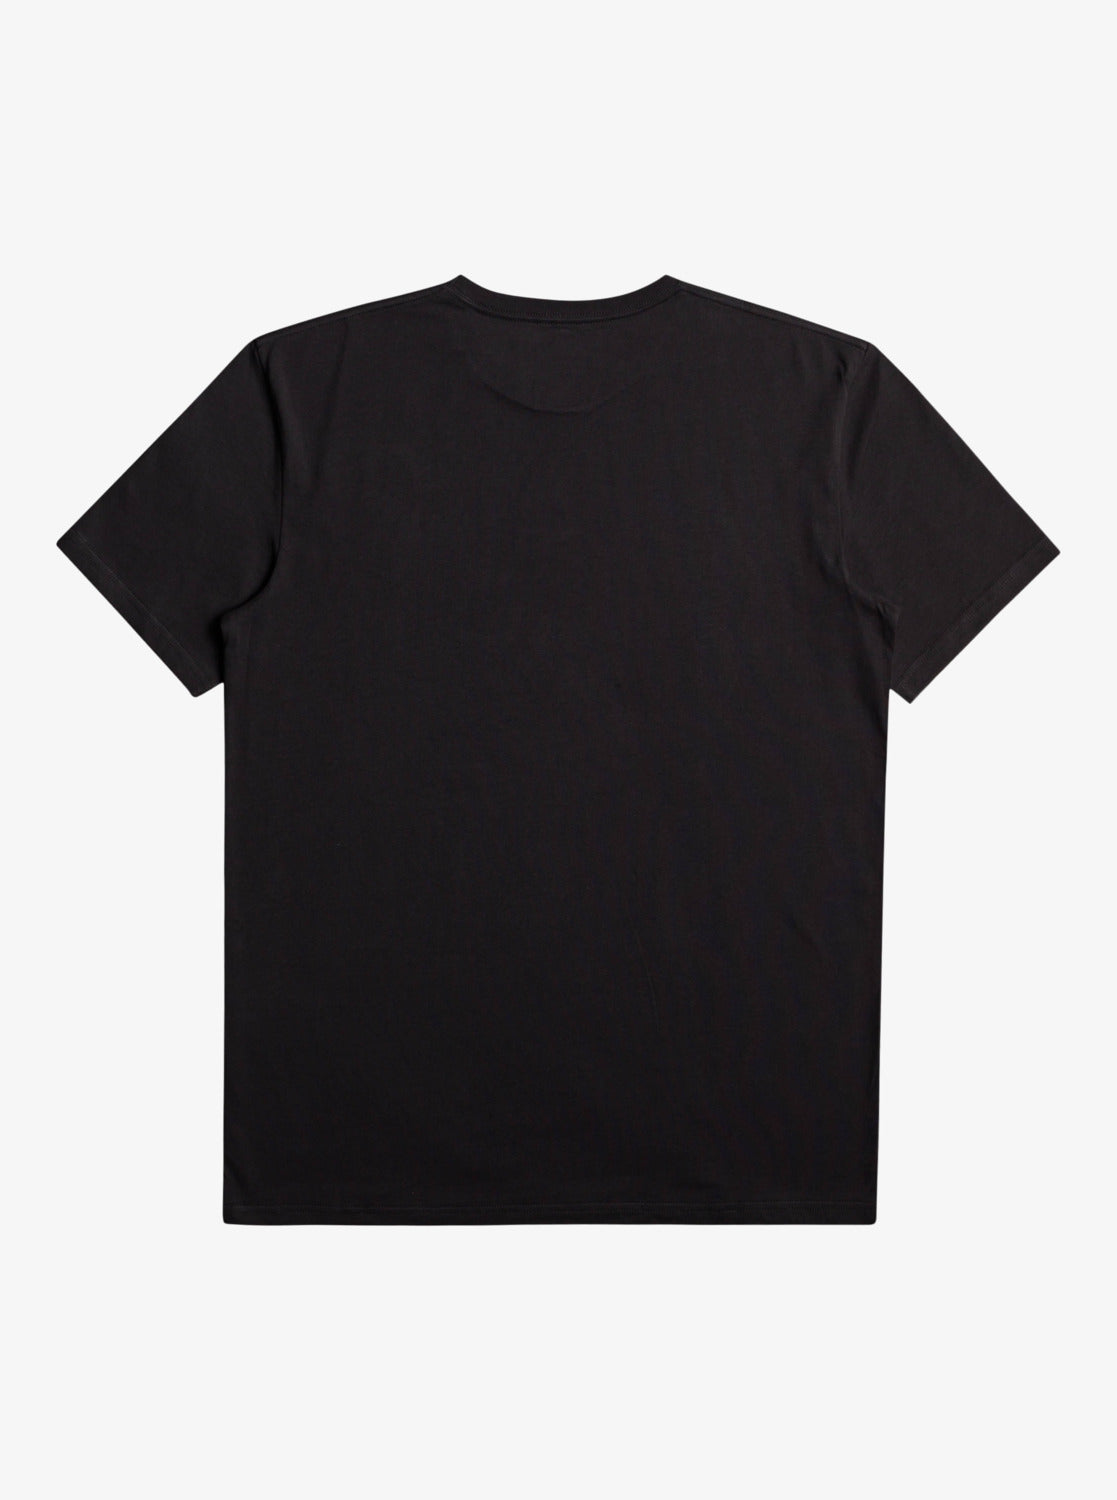 Quiksilver In Shapes Boys T-Shirt in Black